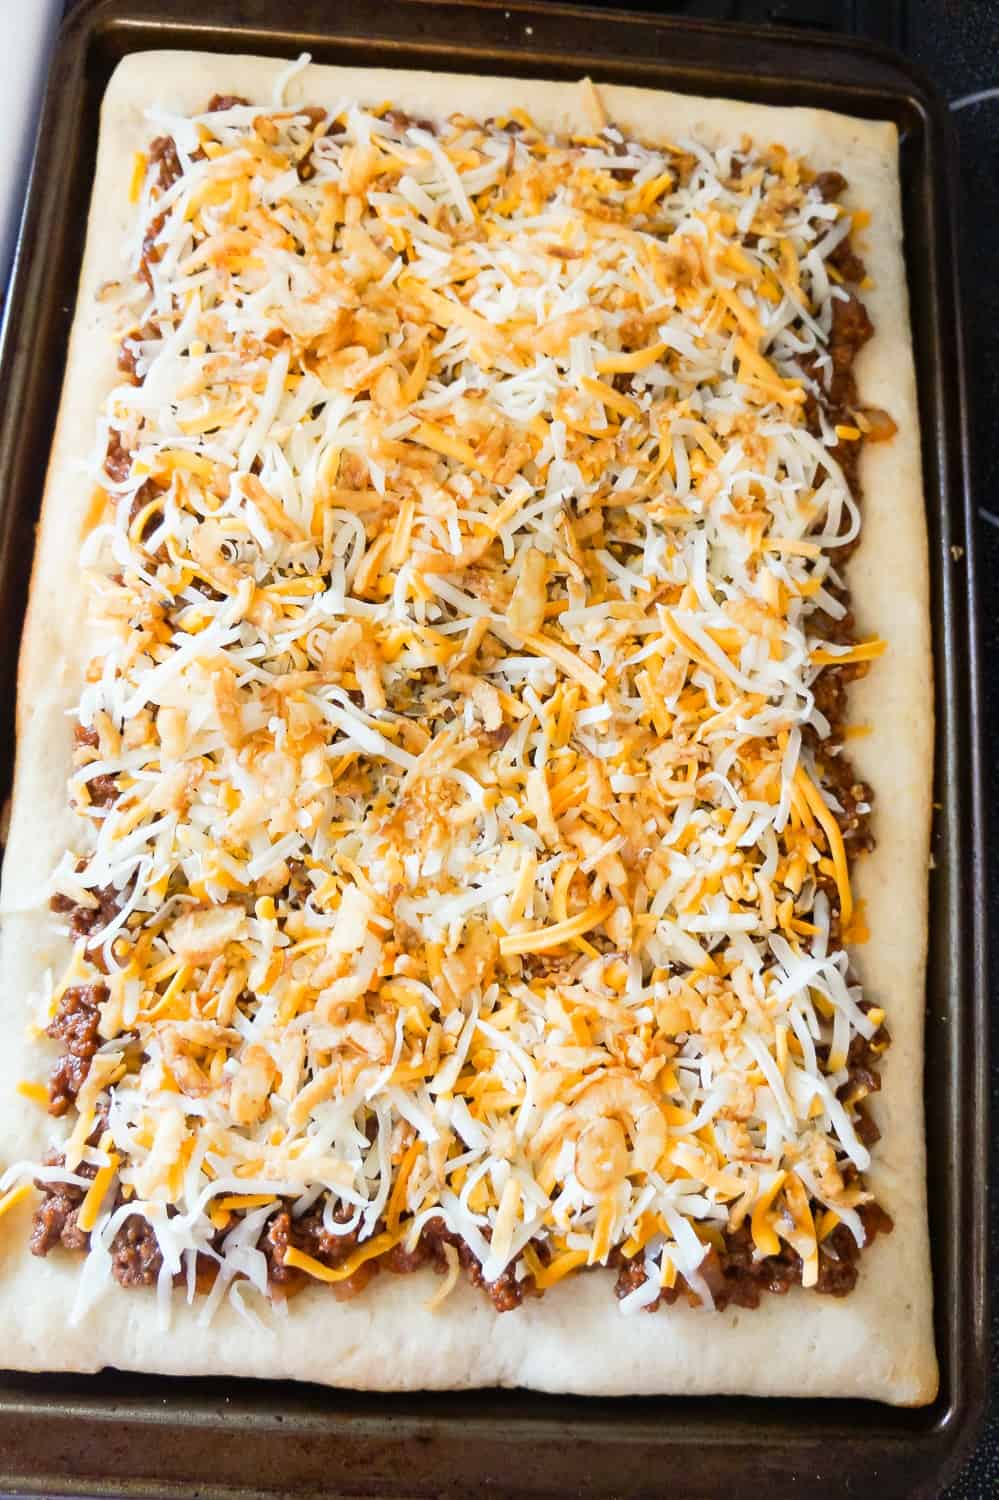 shredded mozzarella cheddar and French's fried onions on top of sloppy joe pizza before baking